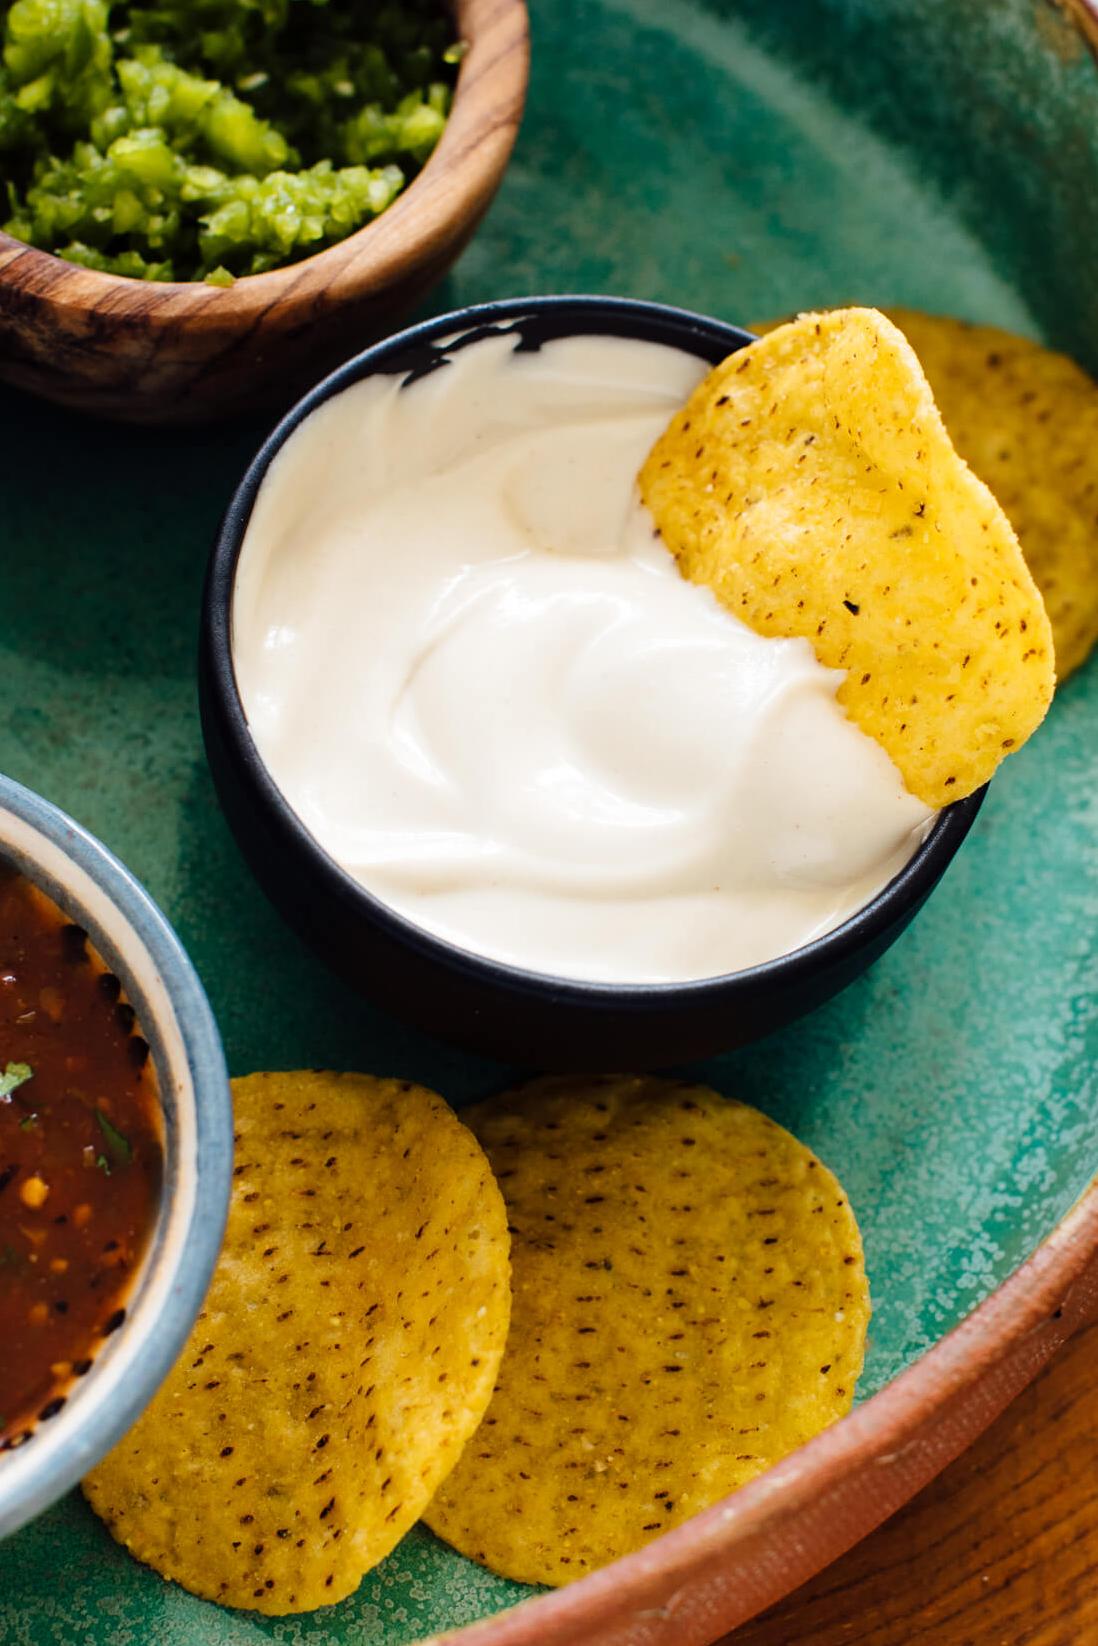  Get ready to be pleasantly surprised by this Mock Sour Cream recipe.